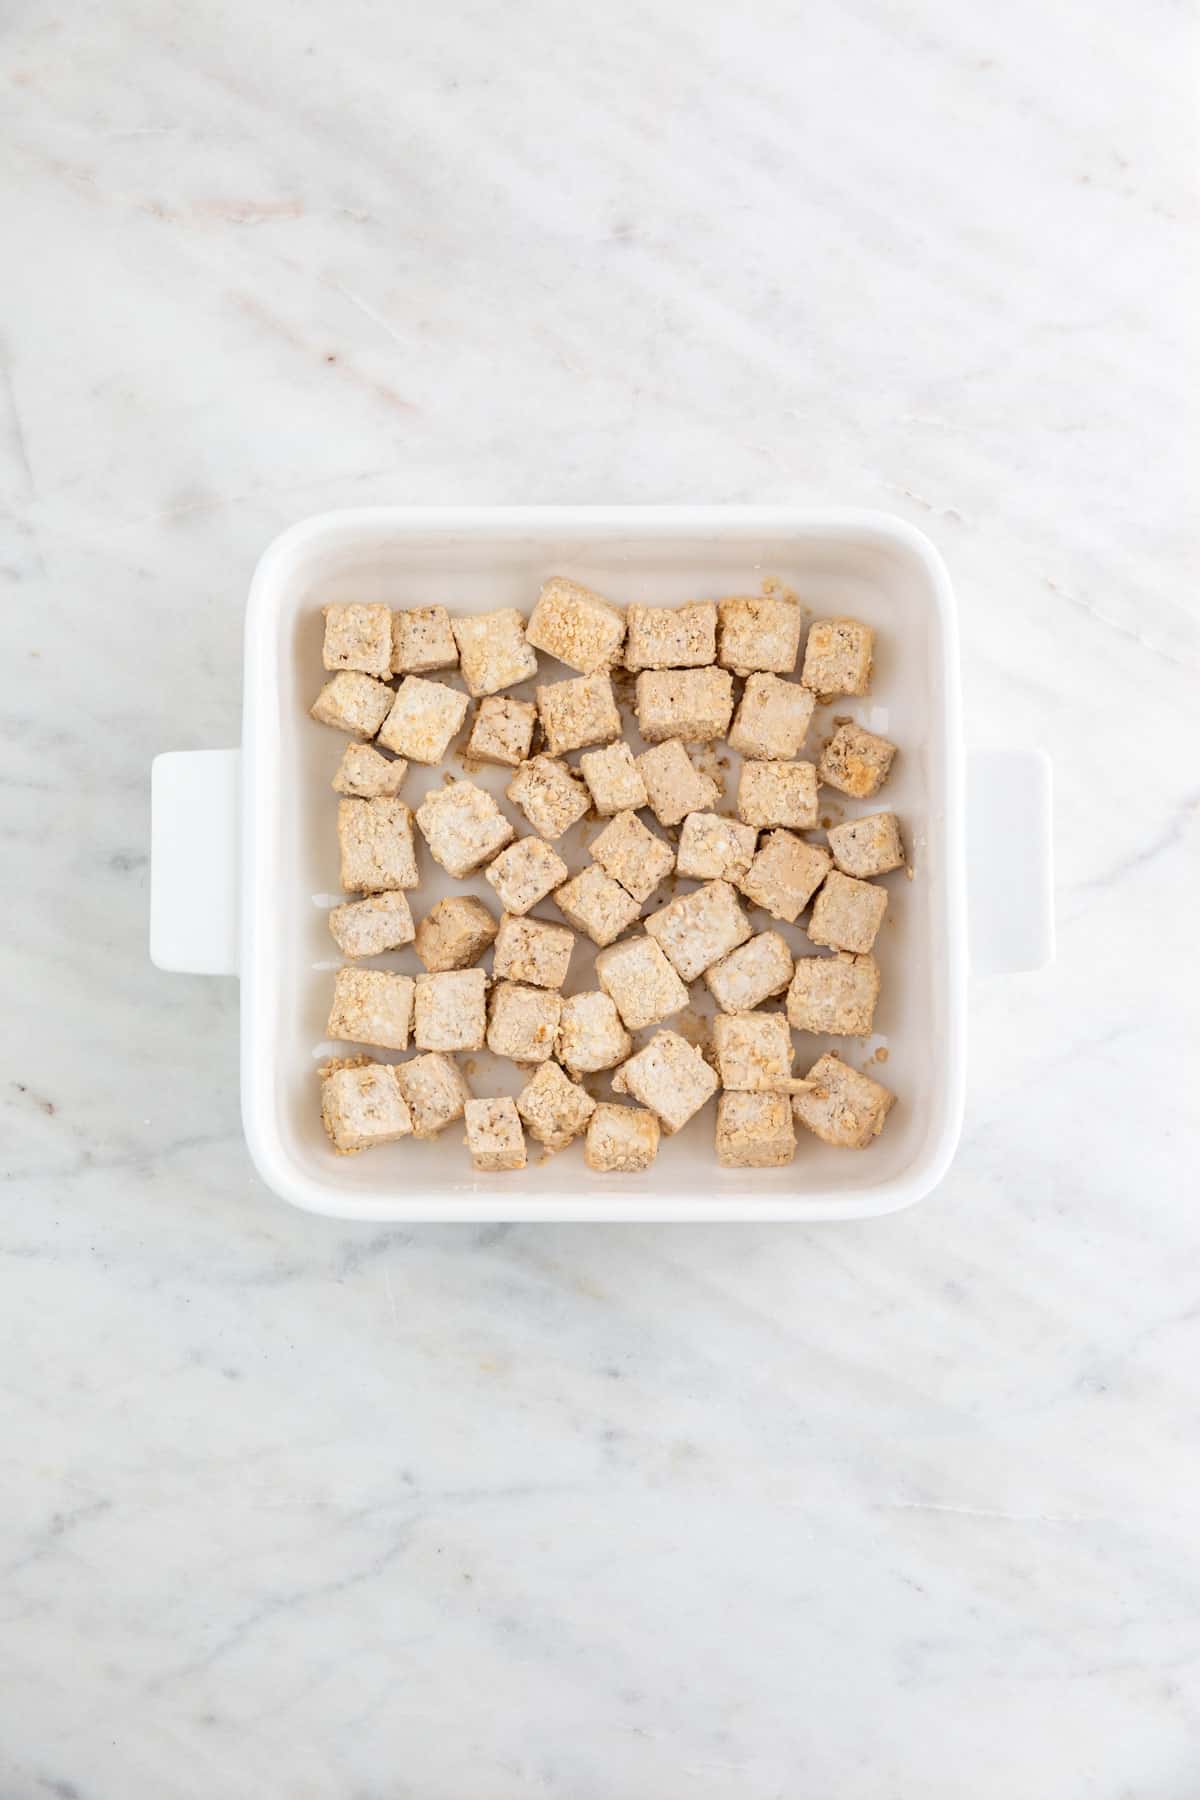 Tofu cubes on a shallow dish already mixed with the cornstarch.